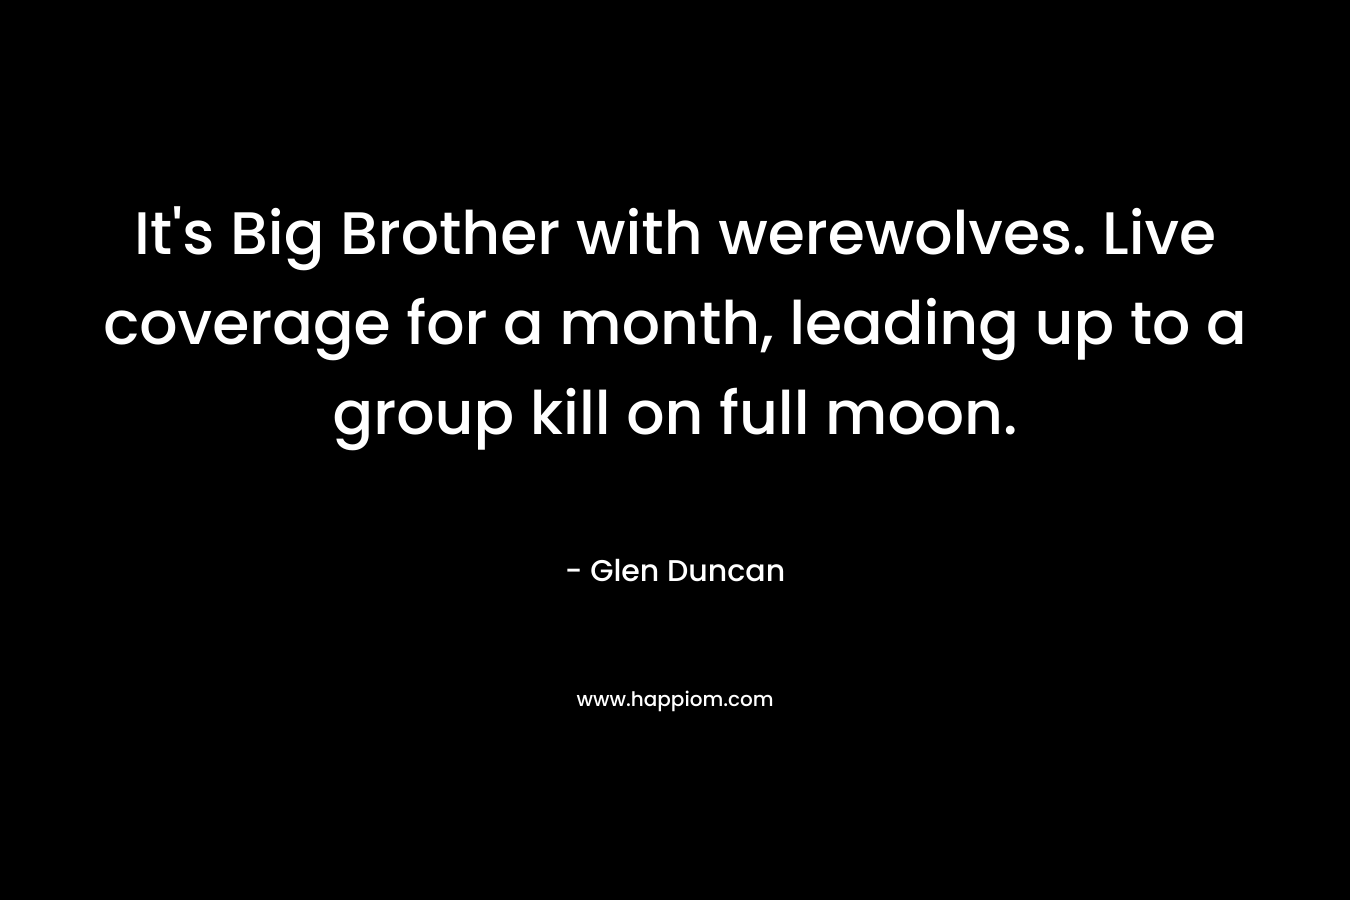 It’s Big Brother with werewolves. Live coverage for a month, leading up to a group kill on full moon. – Glen Duncan